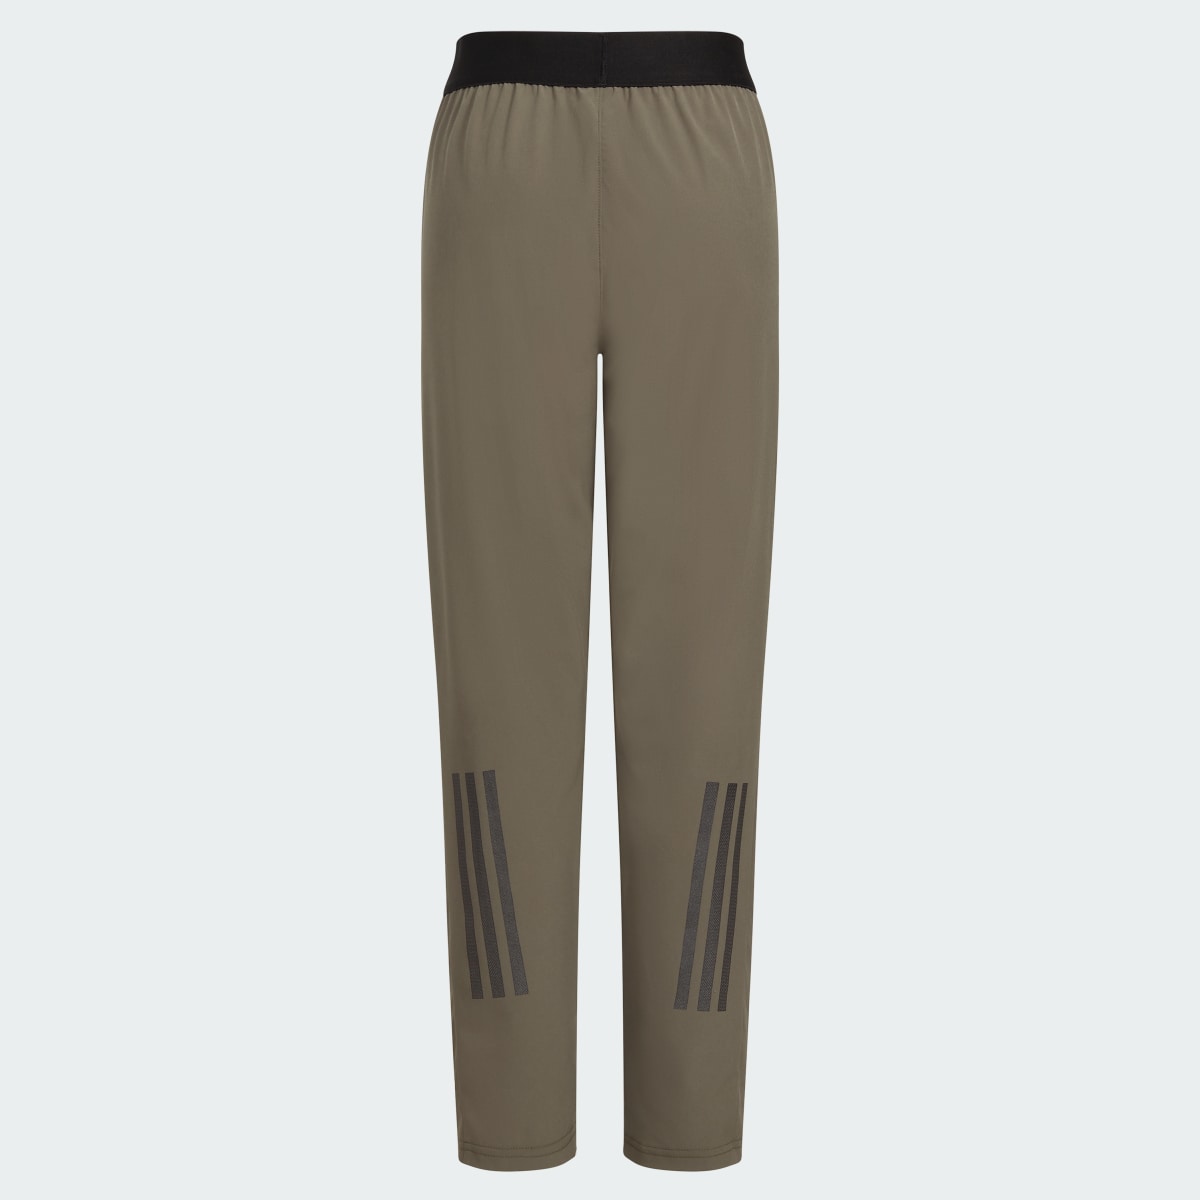 Adidas Designed for Training Stretch Woven Pants. 4